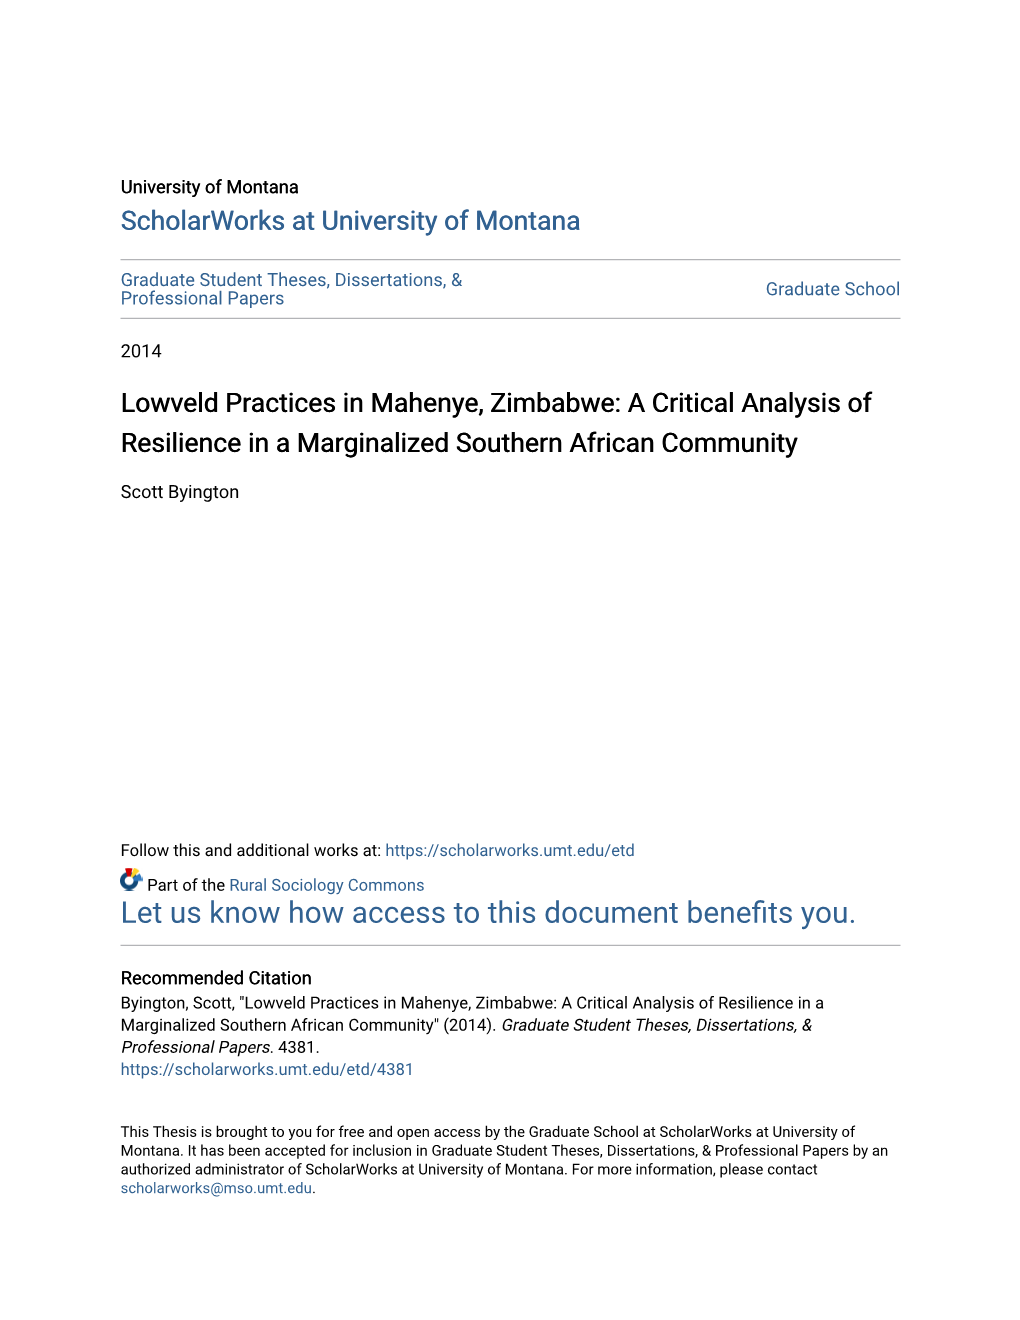 Lowveld Practices in Mahenye, Zimbabwe: a Critical Analysis of Resilience in a Marginalized Southern African Community